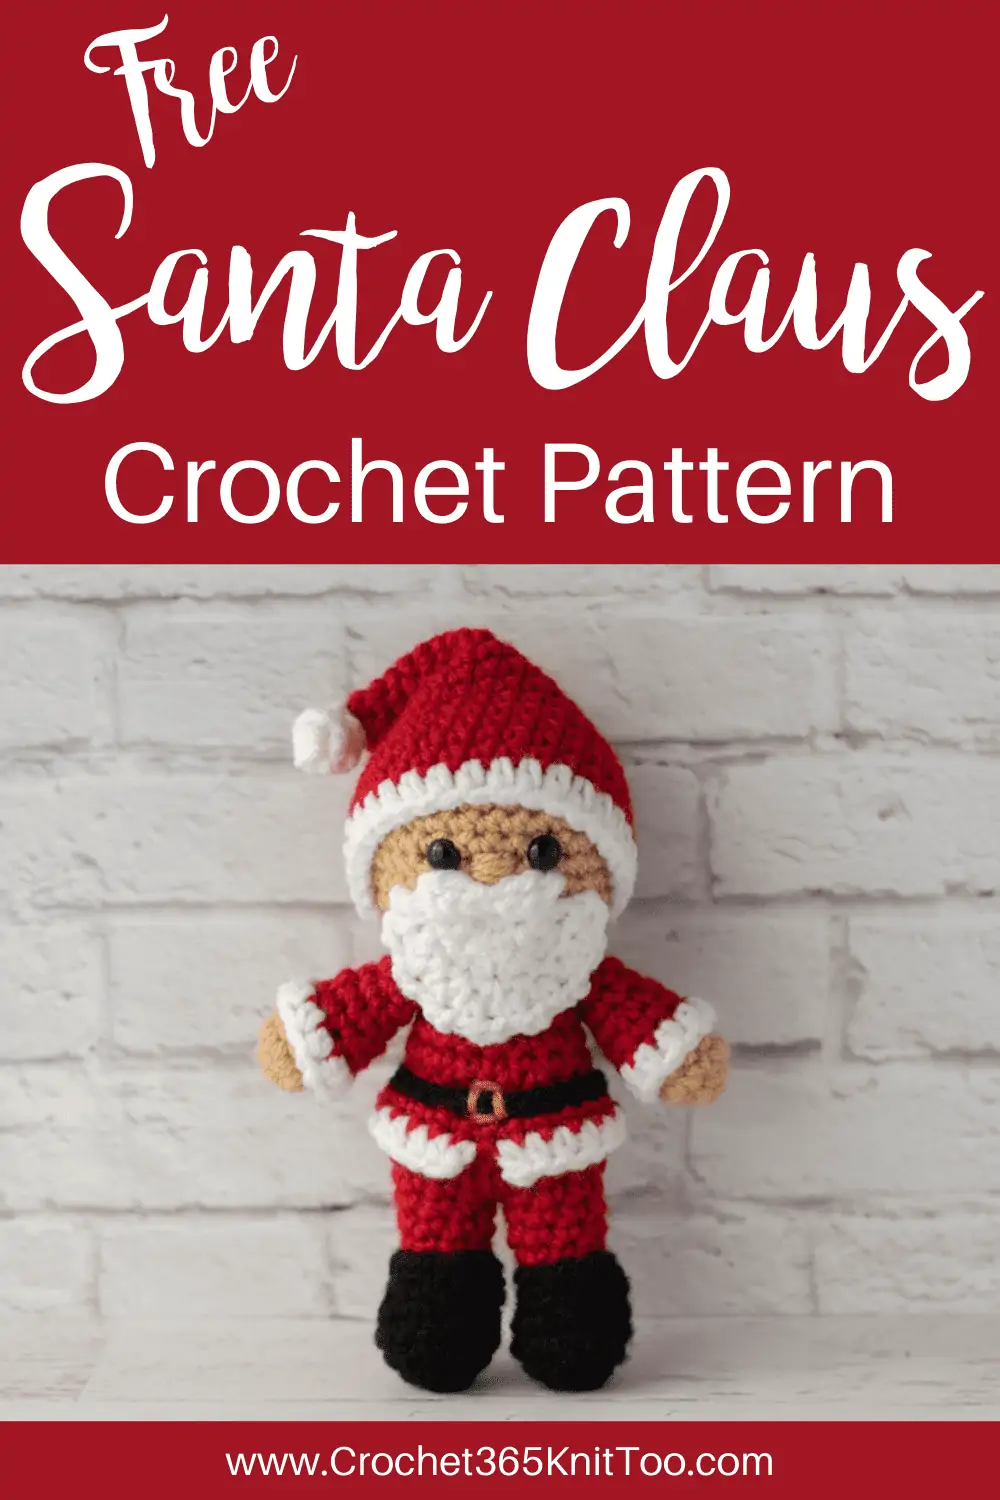 Image of Crochet Santa Claus in Red and White